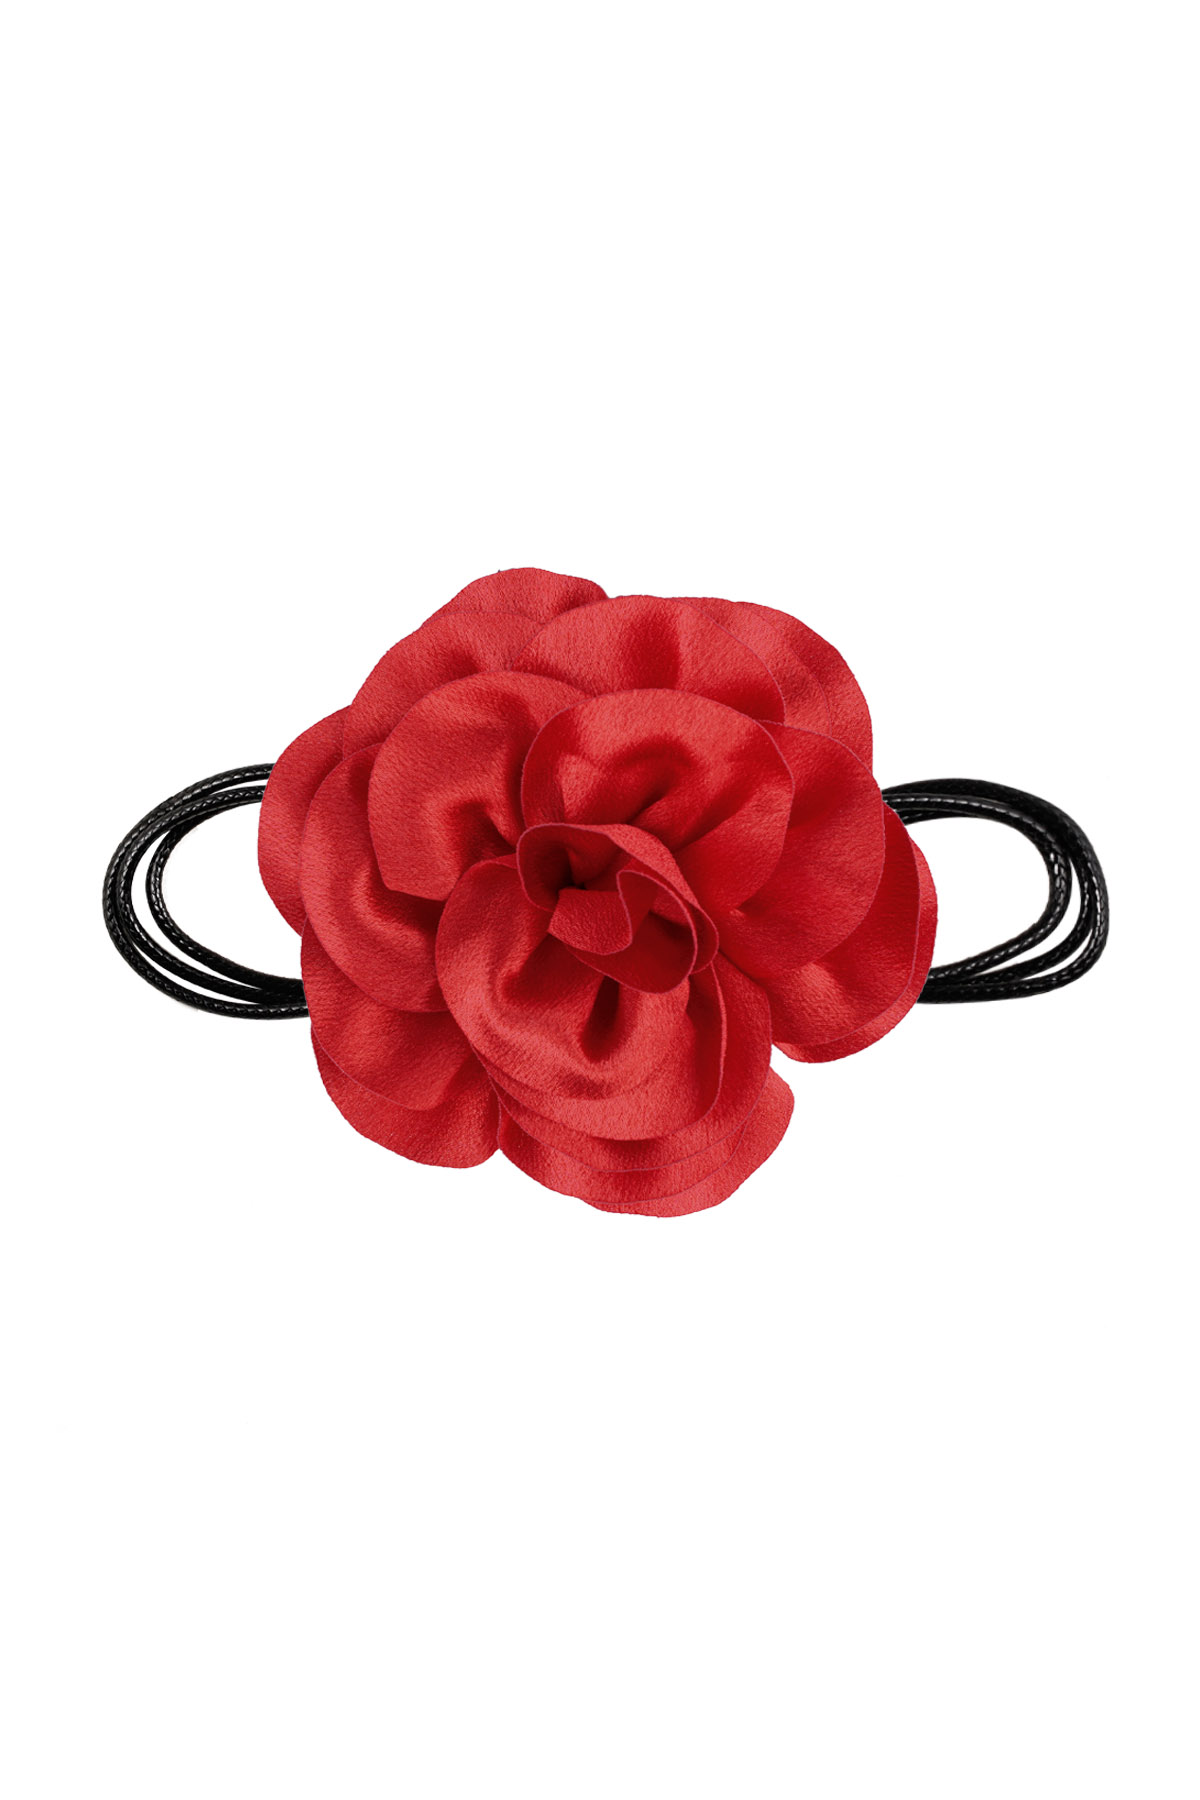 Ketting touw glimmende bloem - rood h5 